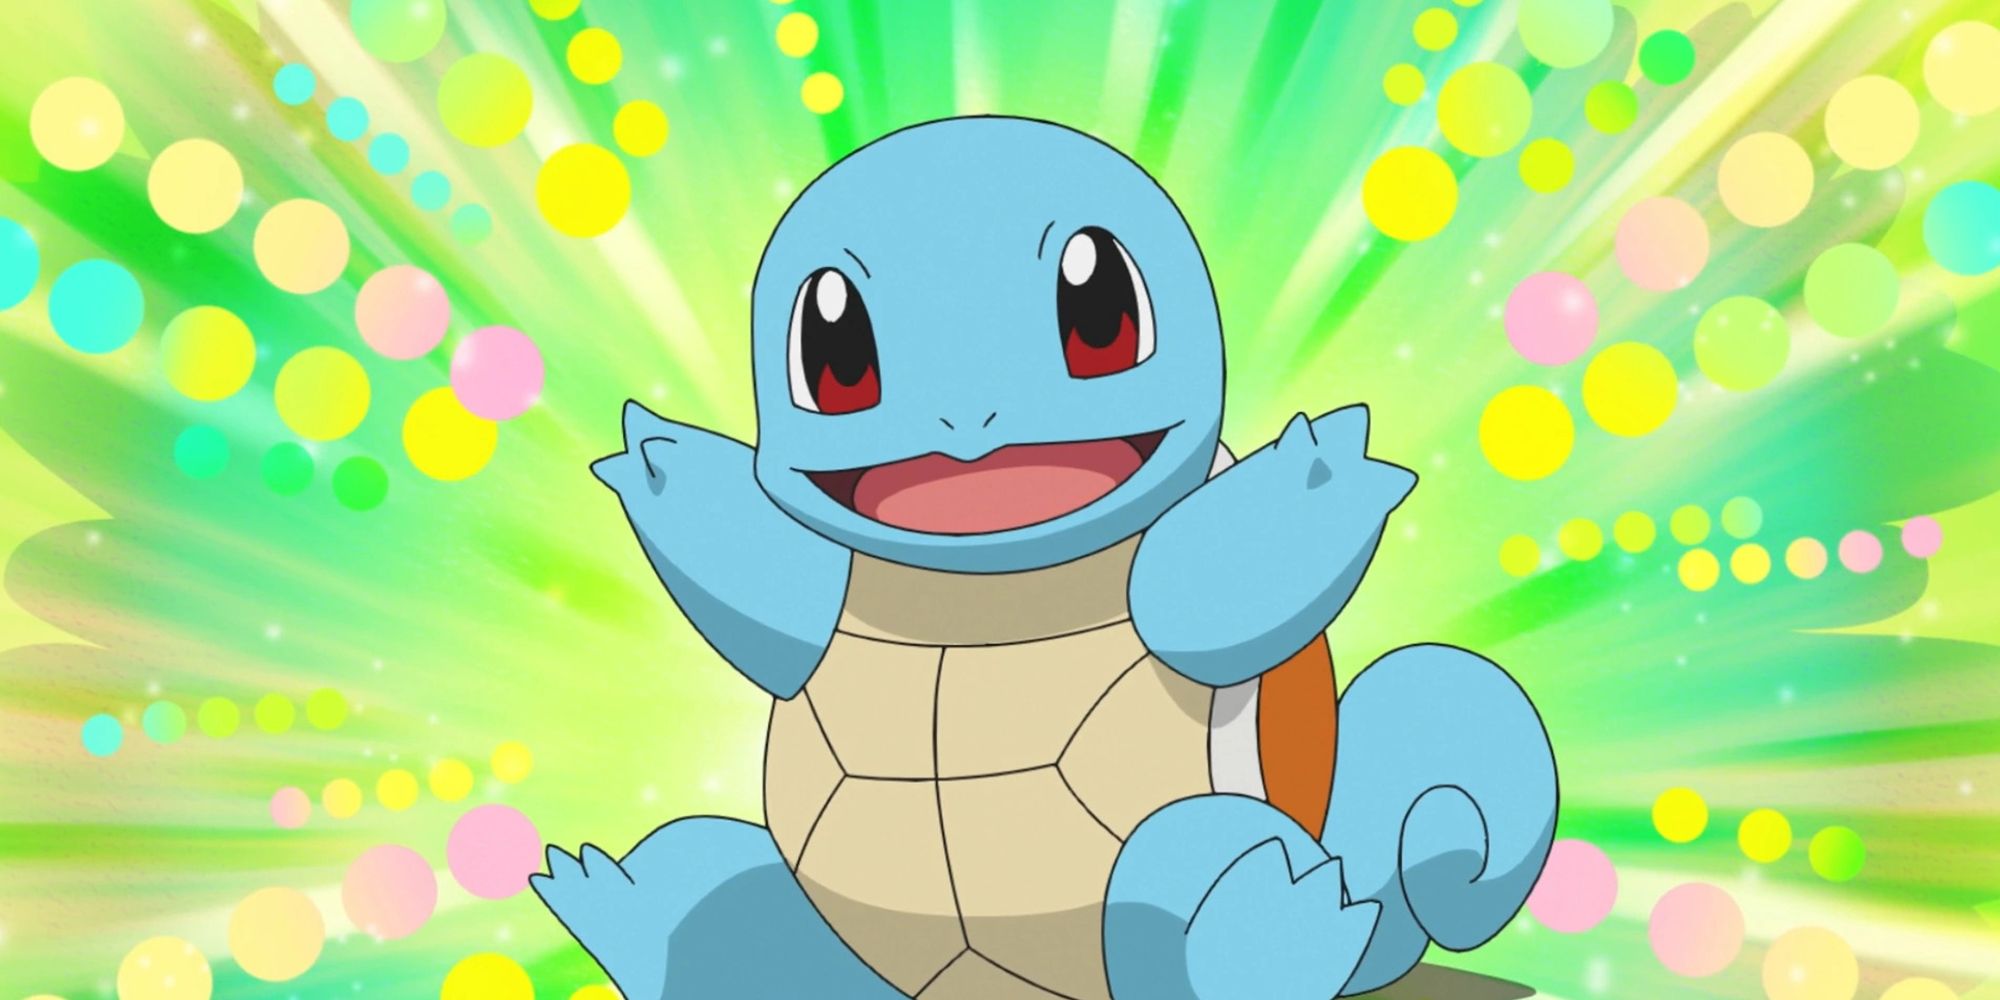 Ash's Squirtle In The Pokemon Anime